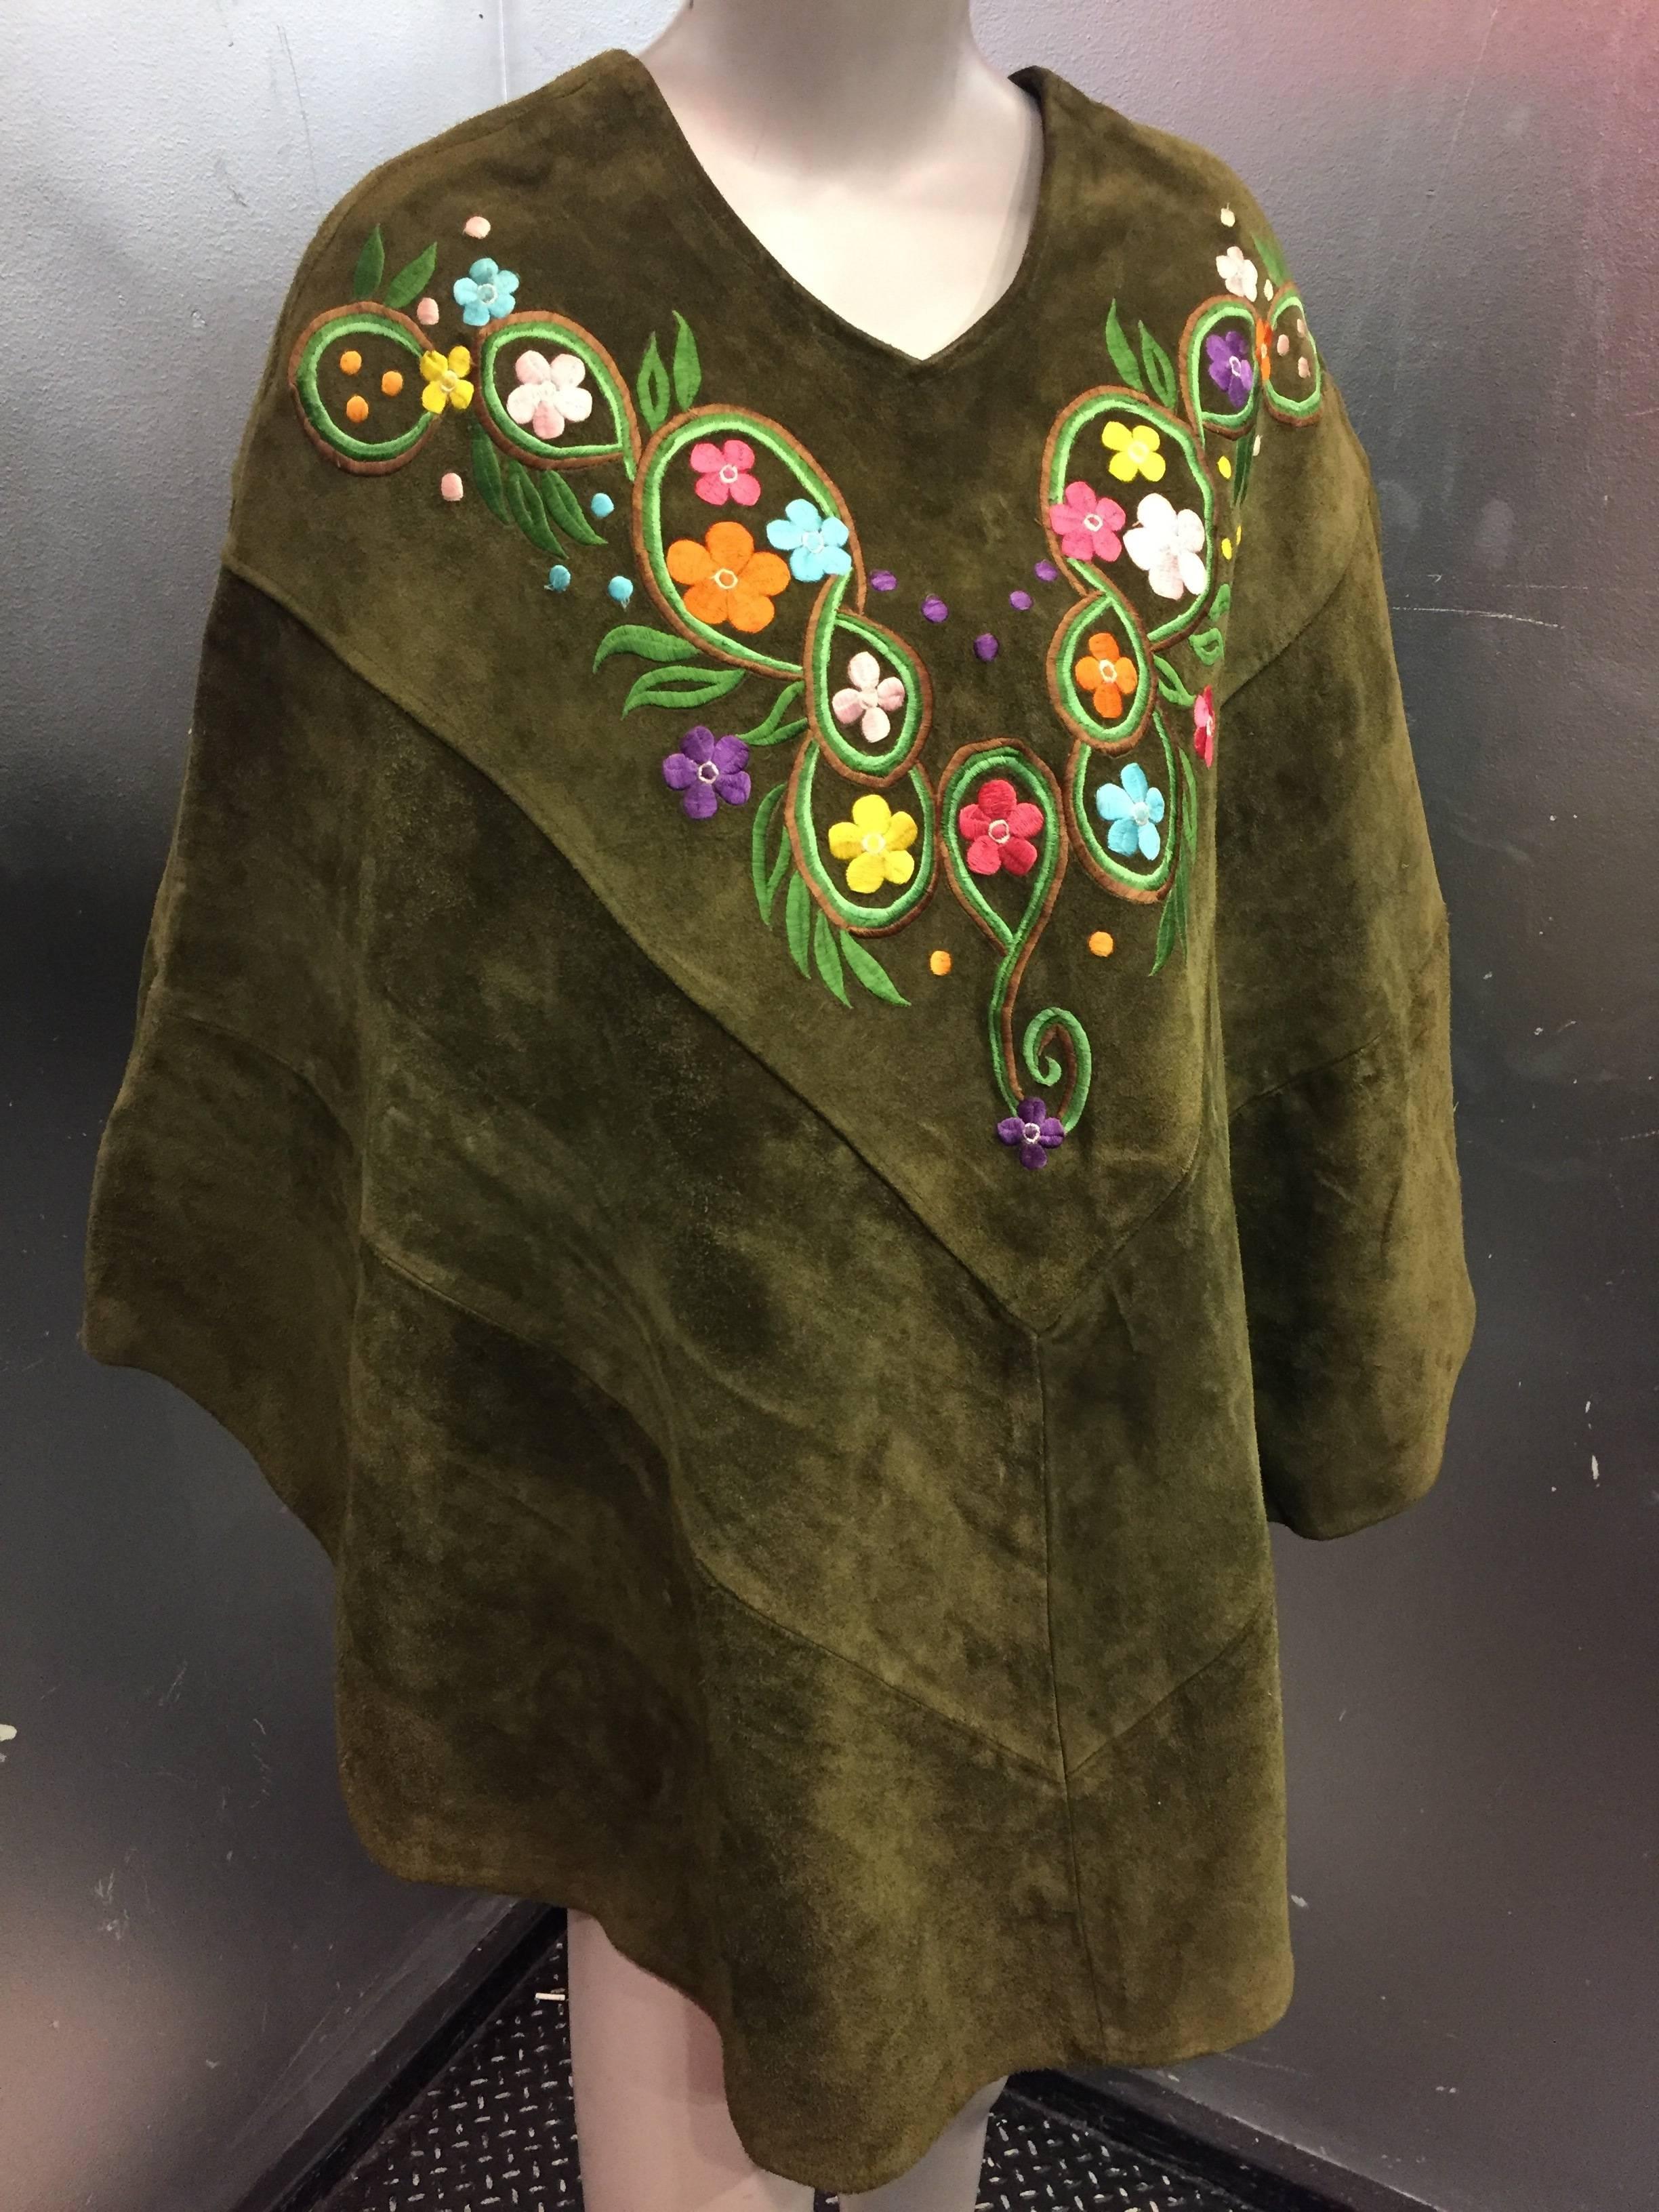 This groovy Mexican poncho with embroidered flowers has a true 60's Hippie flower power feel. Made of a substantial suede and adorned with multi-color flowers. This poncho is perfect for festivals or concerts, and is a great compliment to any true